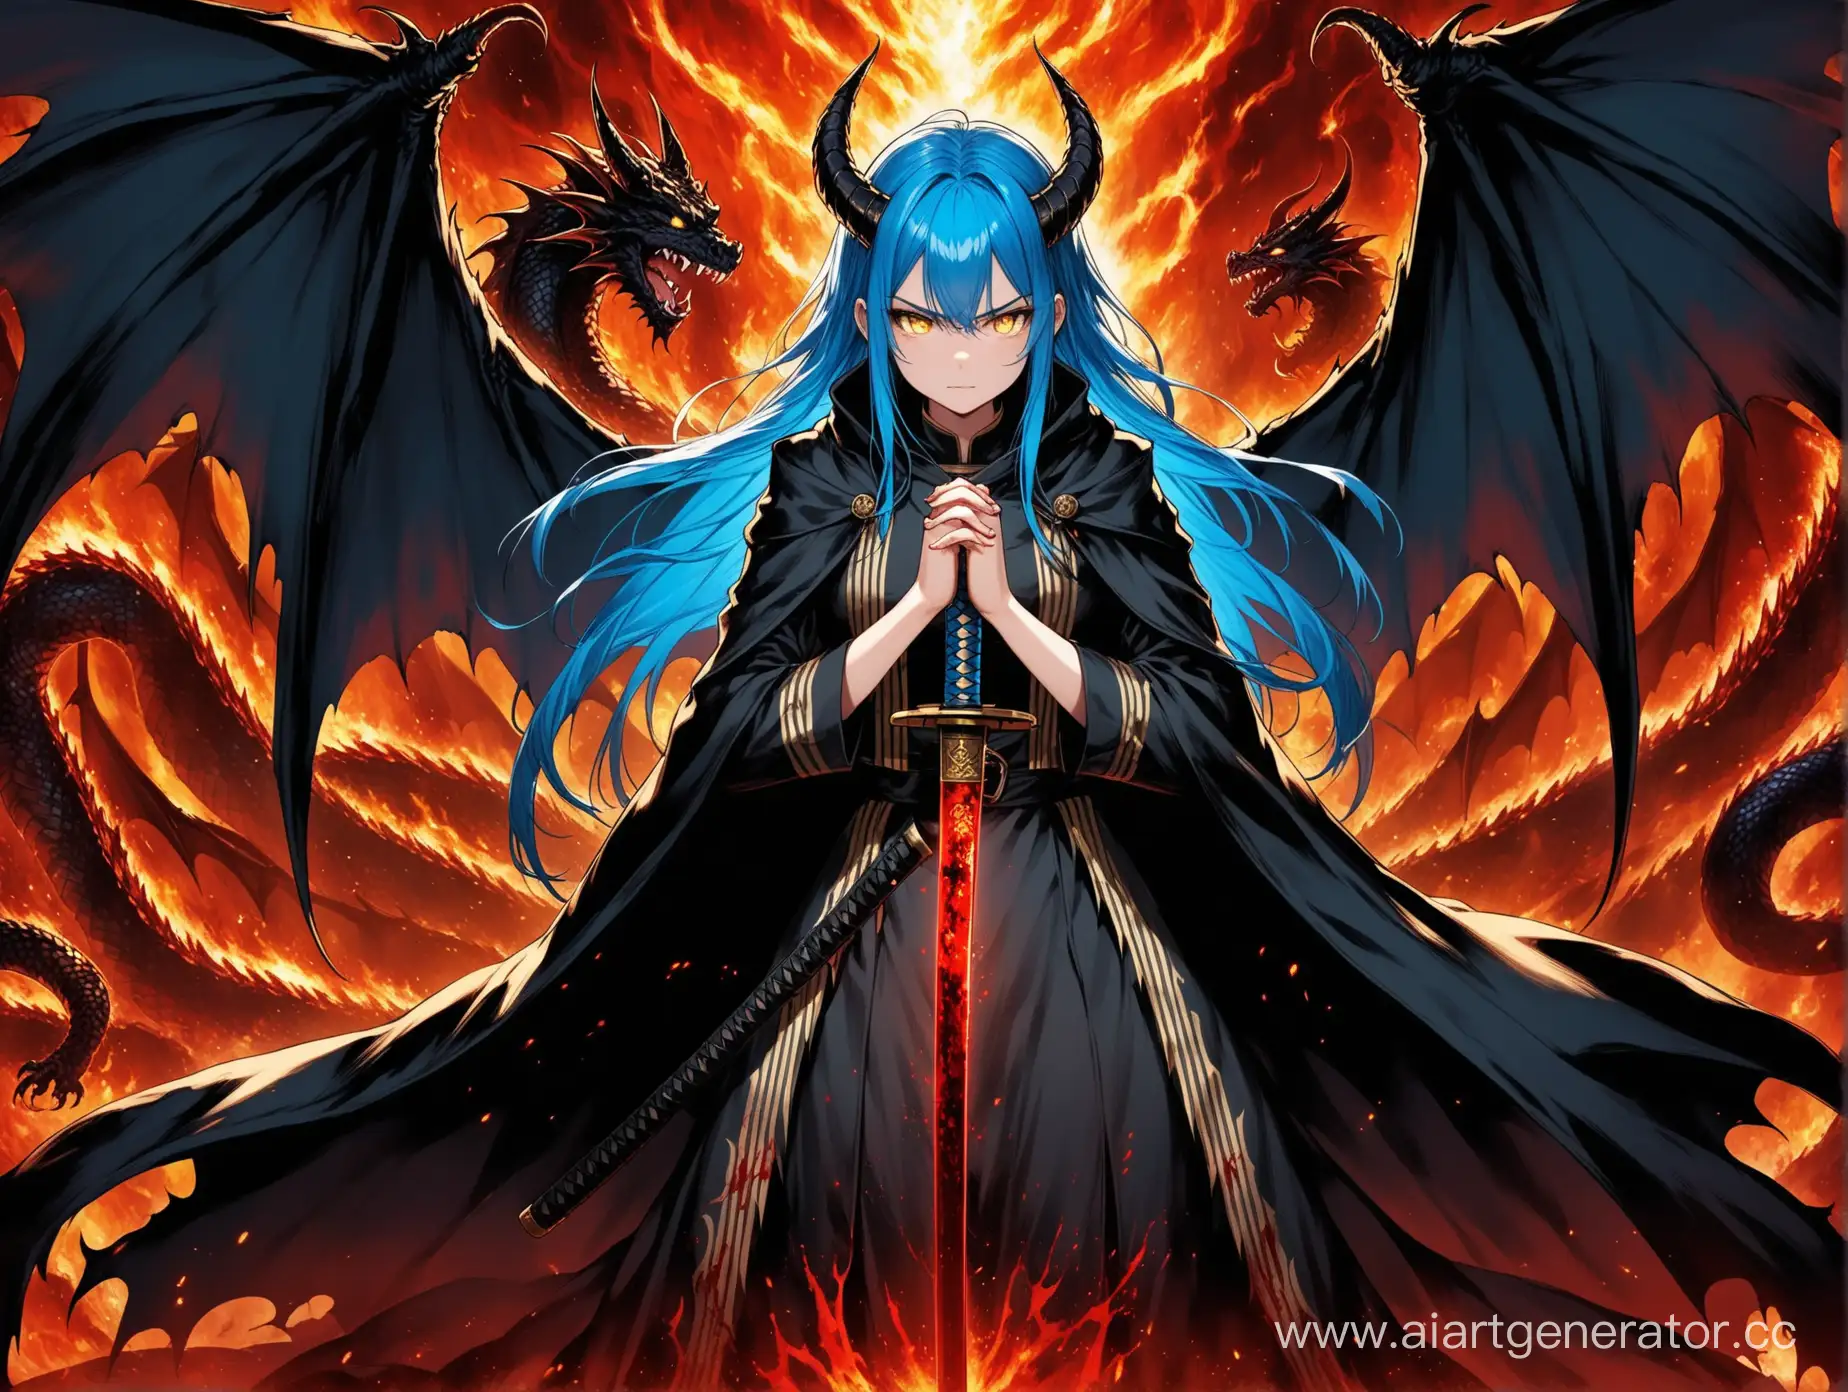 Mystical-BlueHaired-Girl-with-Dragon-Wings-and-BloodStained-Katana-in-Hell